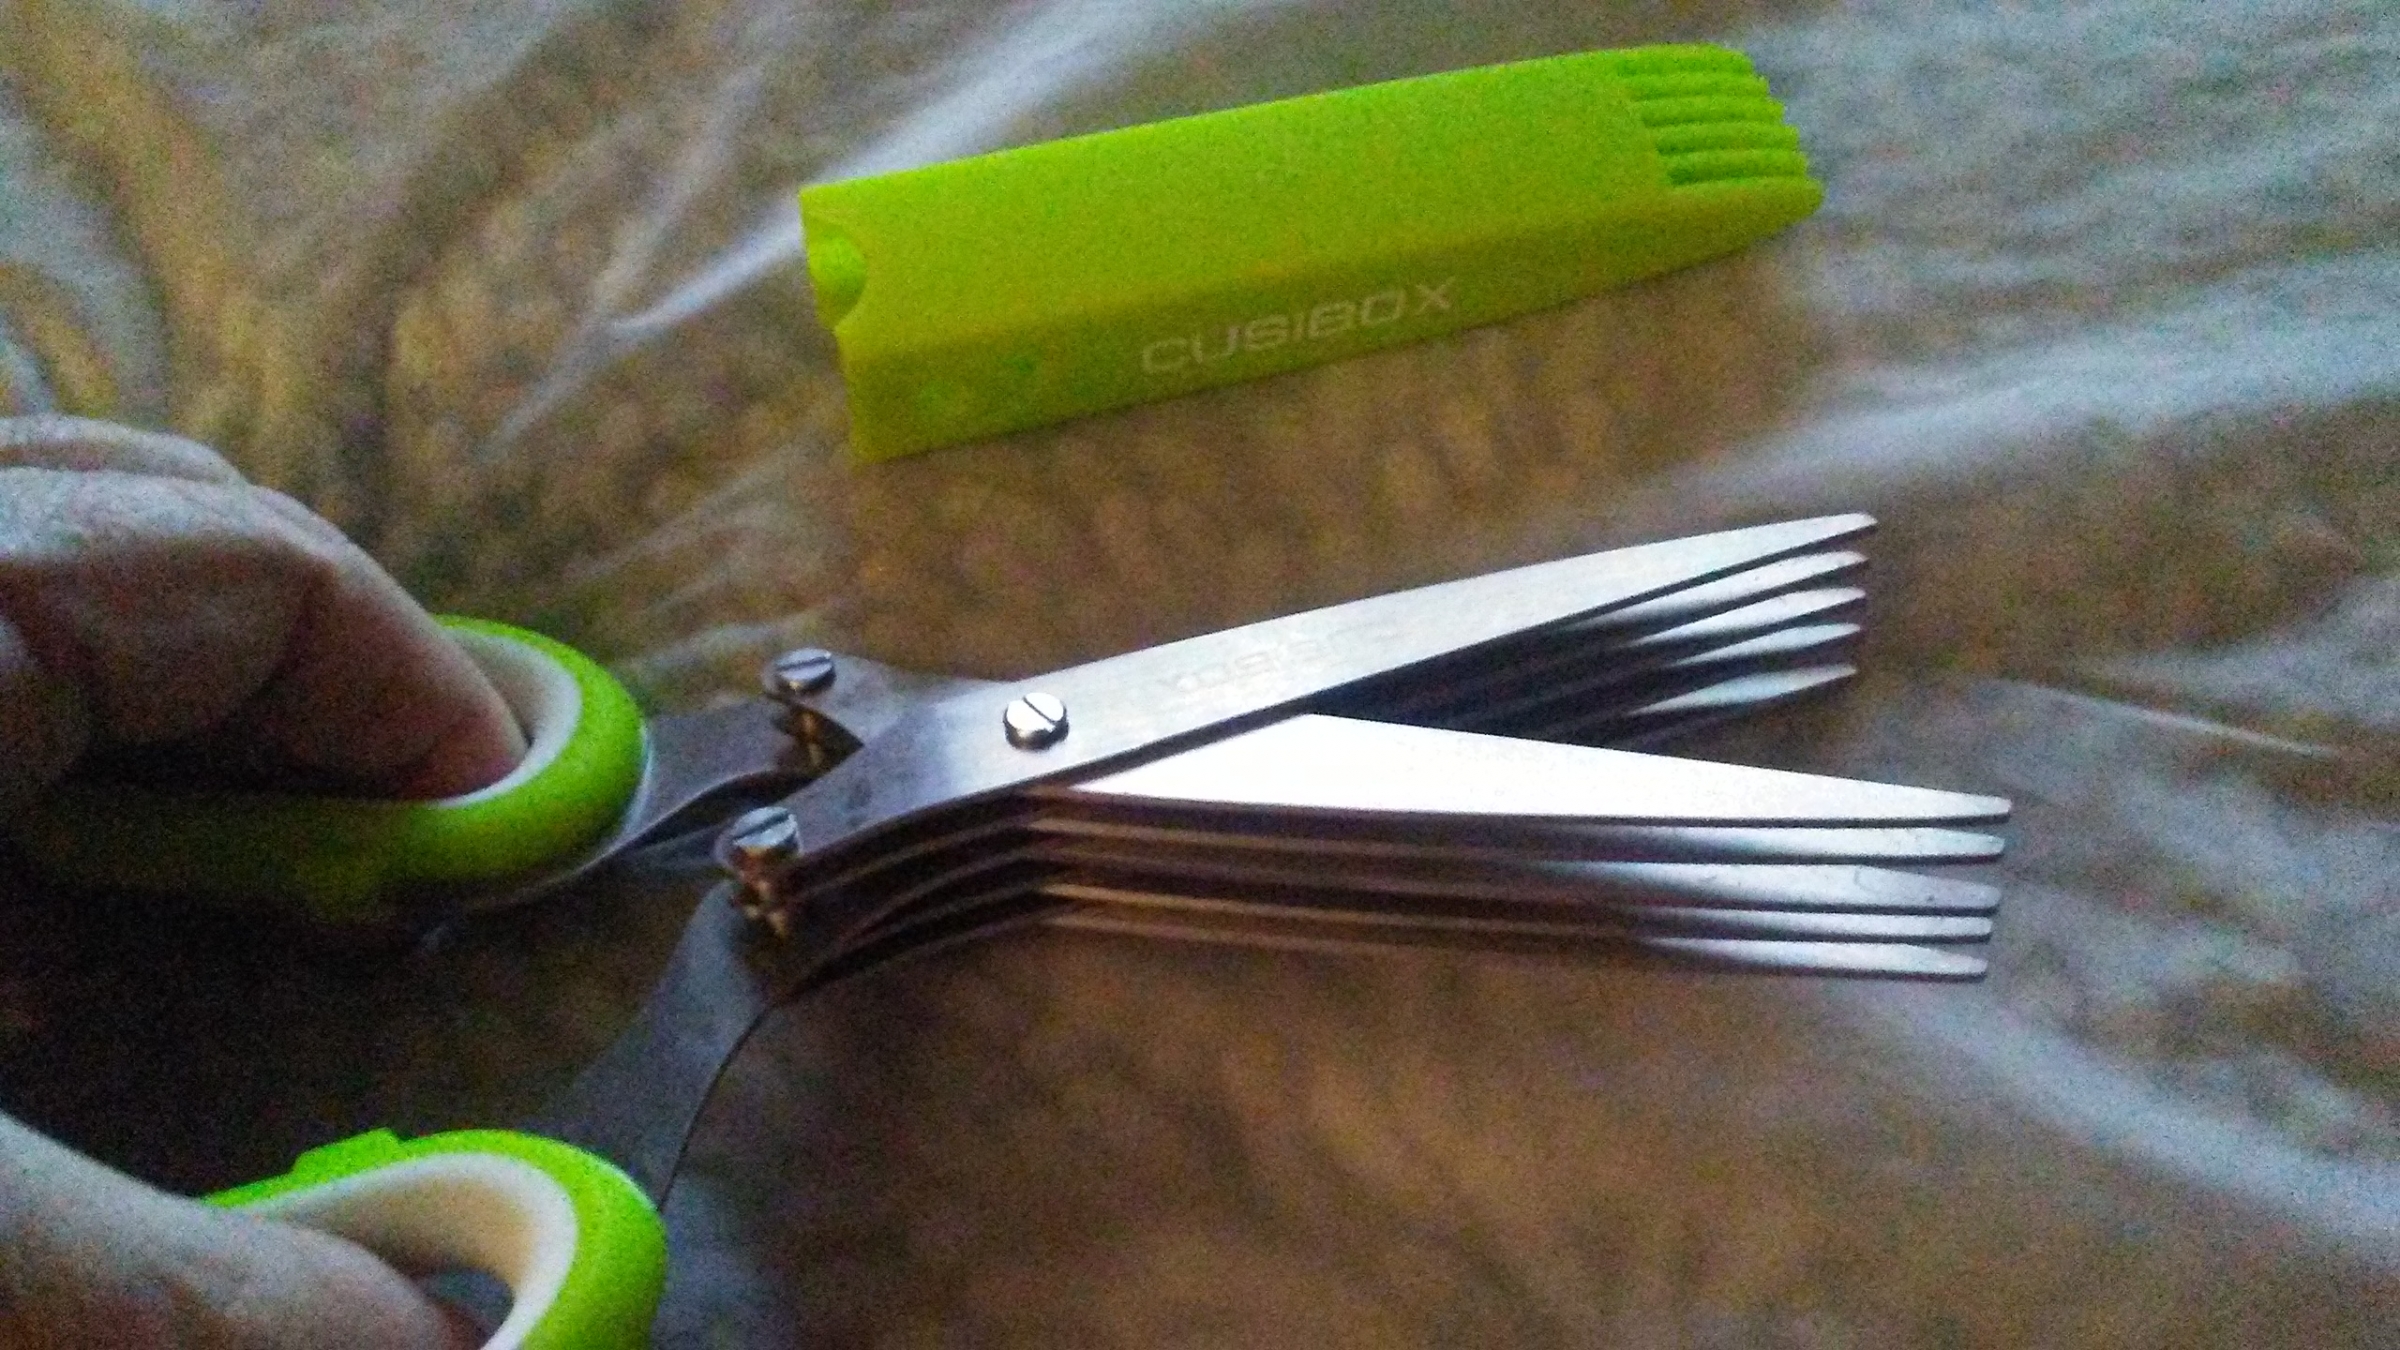 These kitchen shears have 5 sharp blades that quickly and easily snip through your herbs